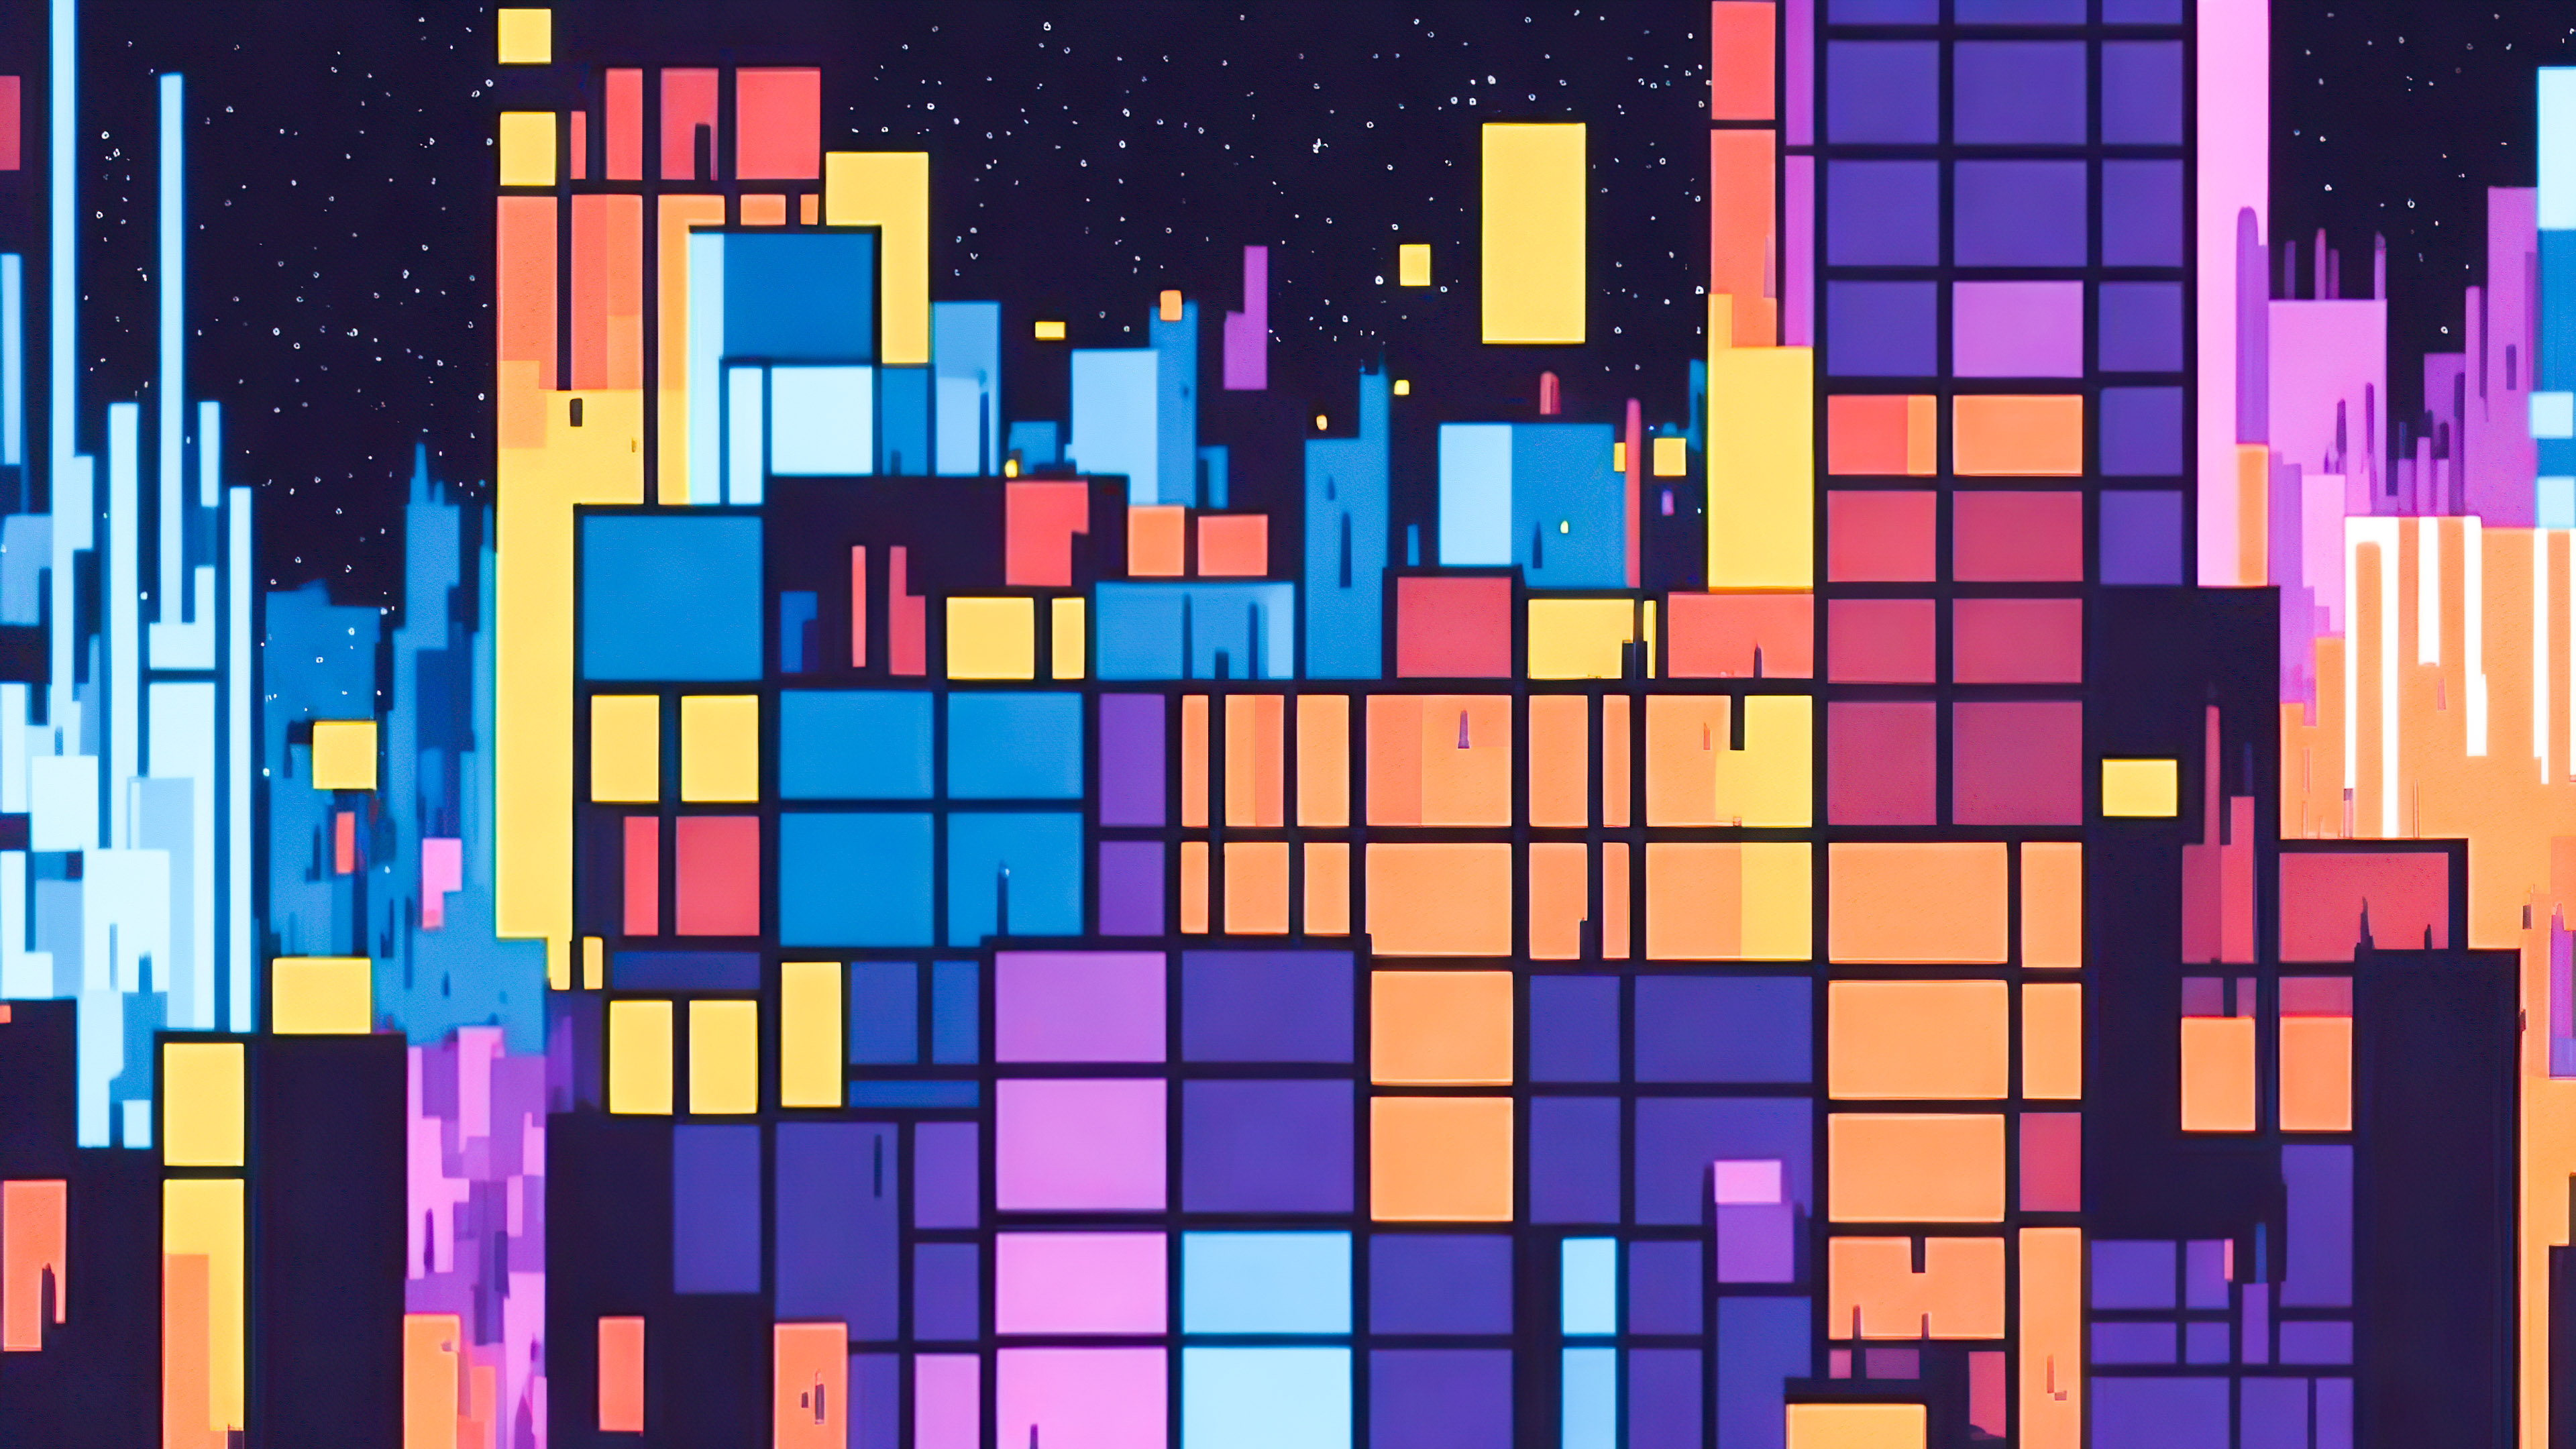 Revitalize your workspace with our 4k abstract art wallpaper desktop, featuring a mesmerizing composition of colorful squares and rectangles.